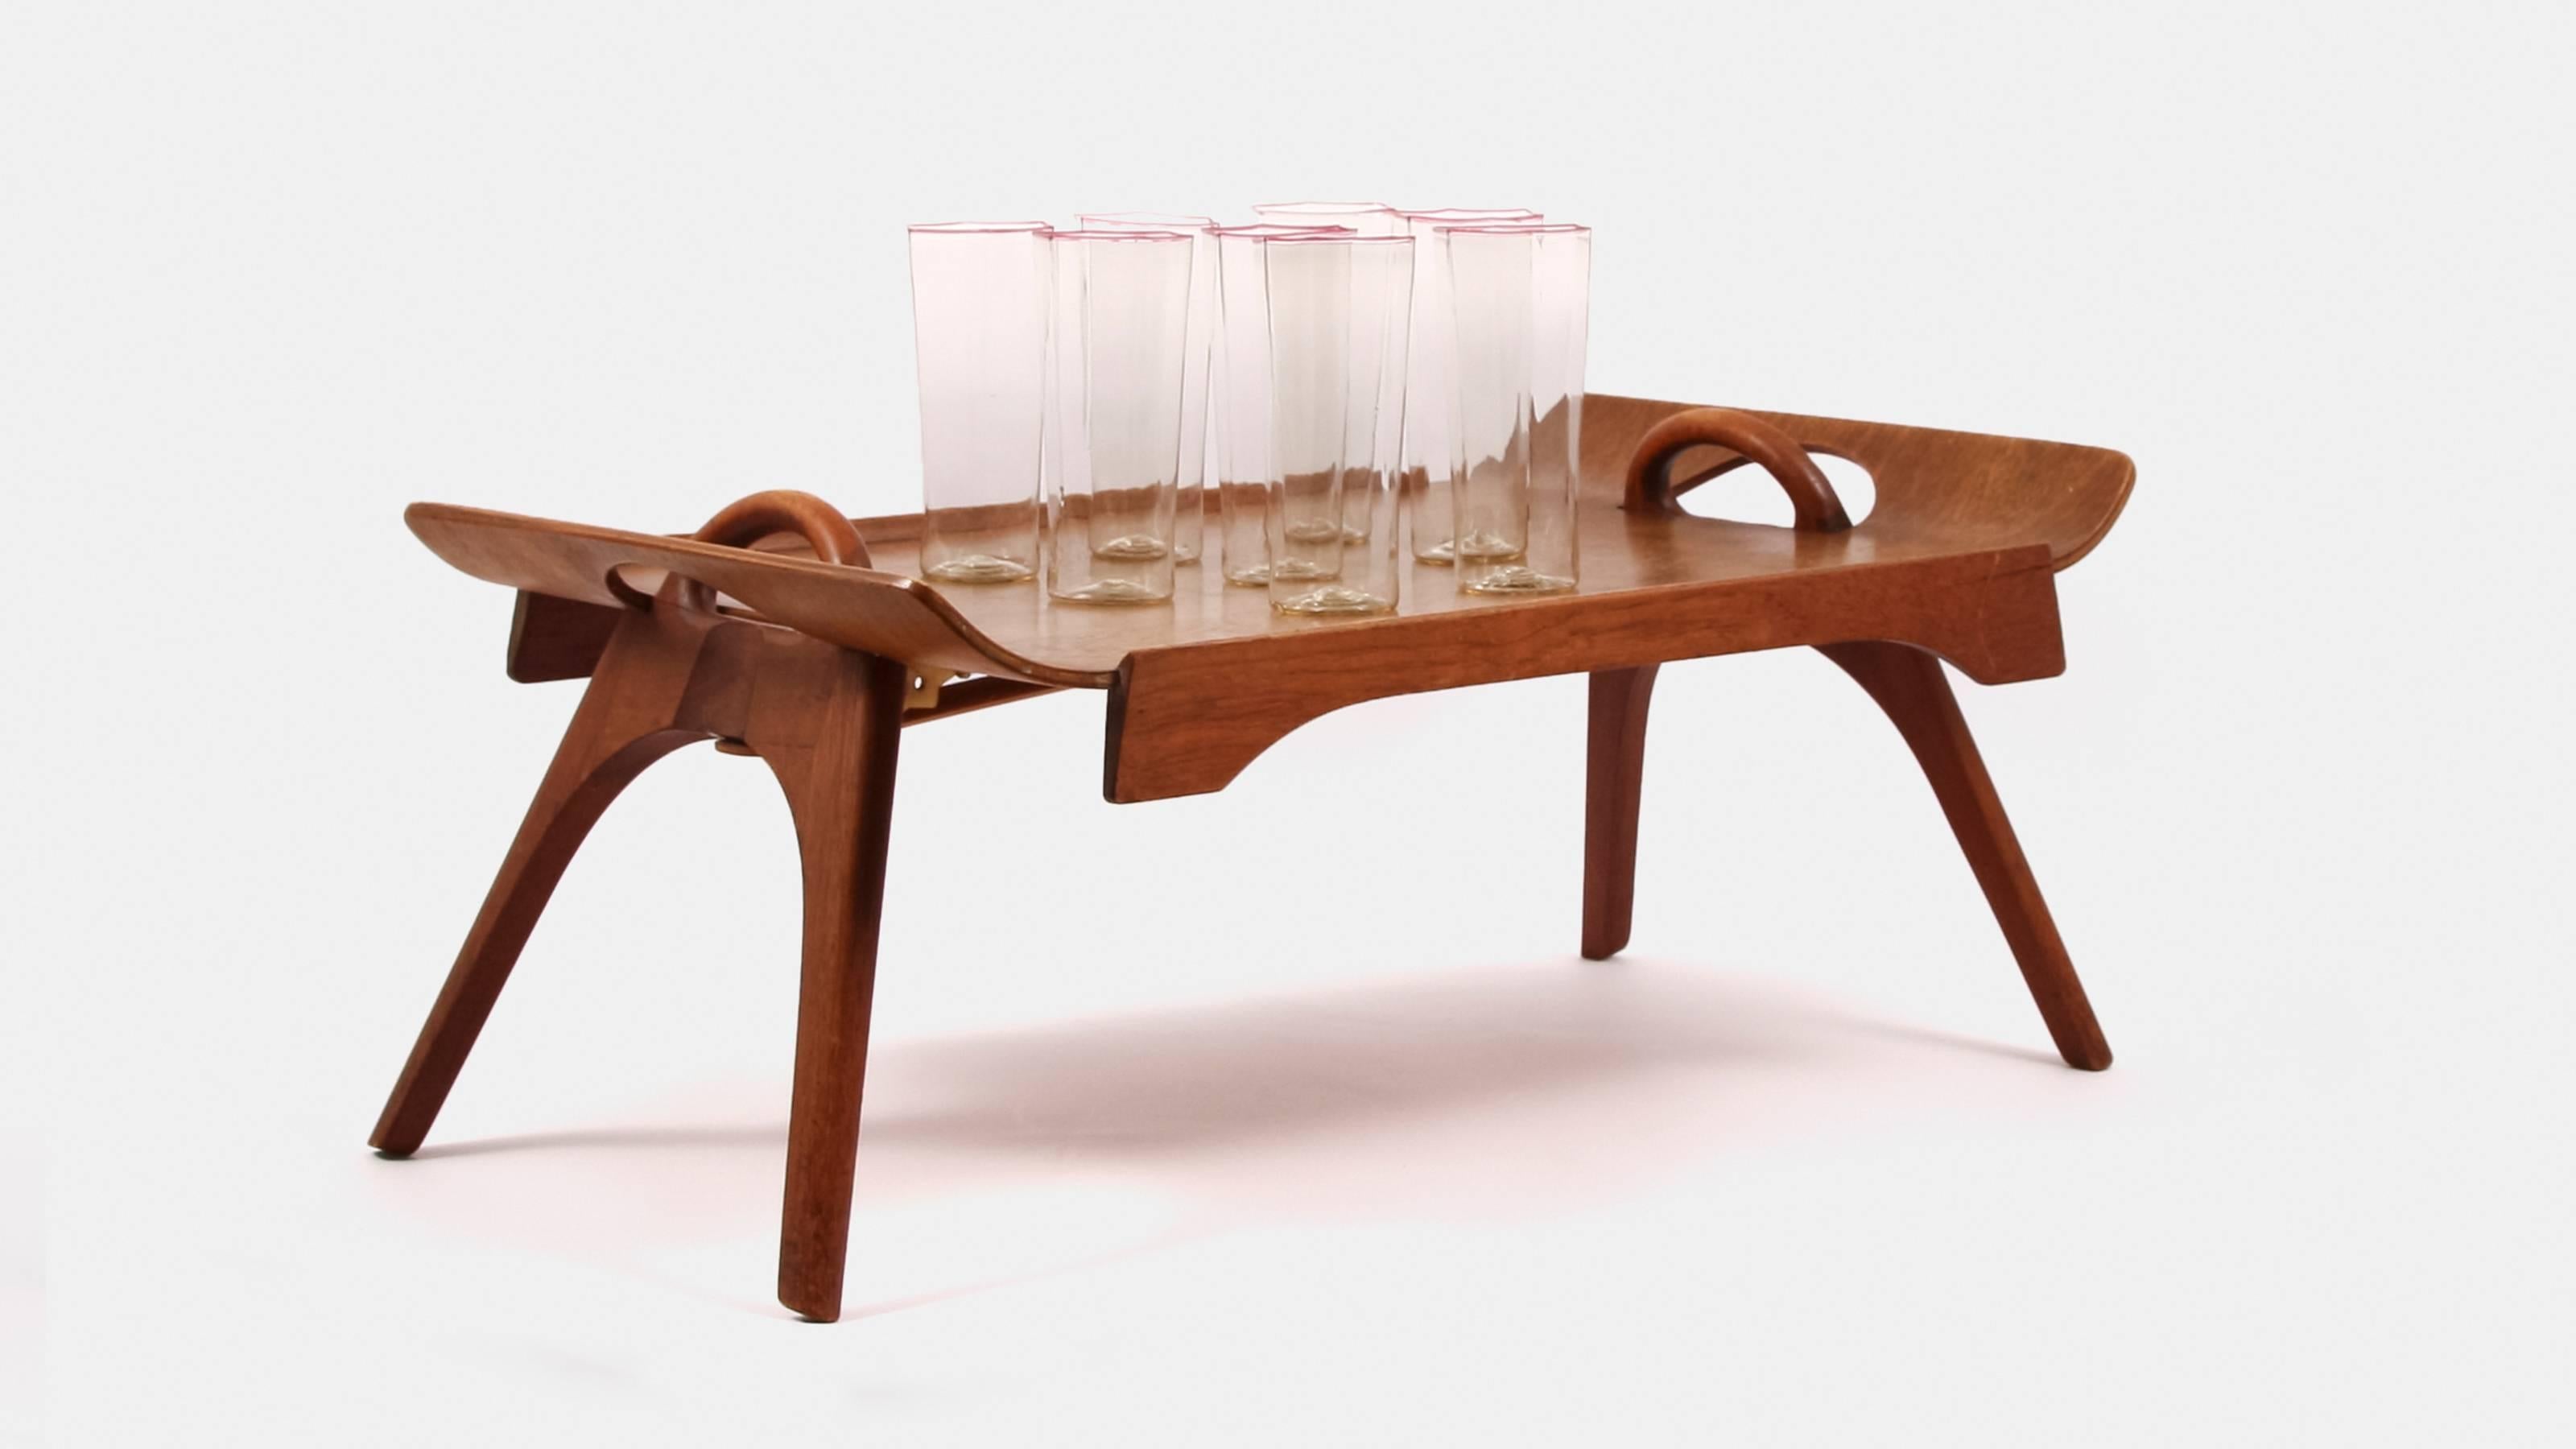 An unusual midcentury drinks tray that has foldable sides with tapered legs.